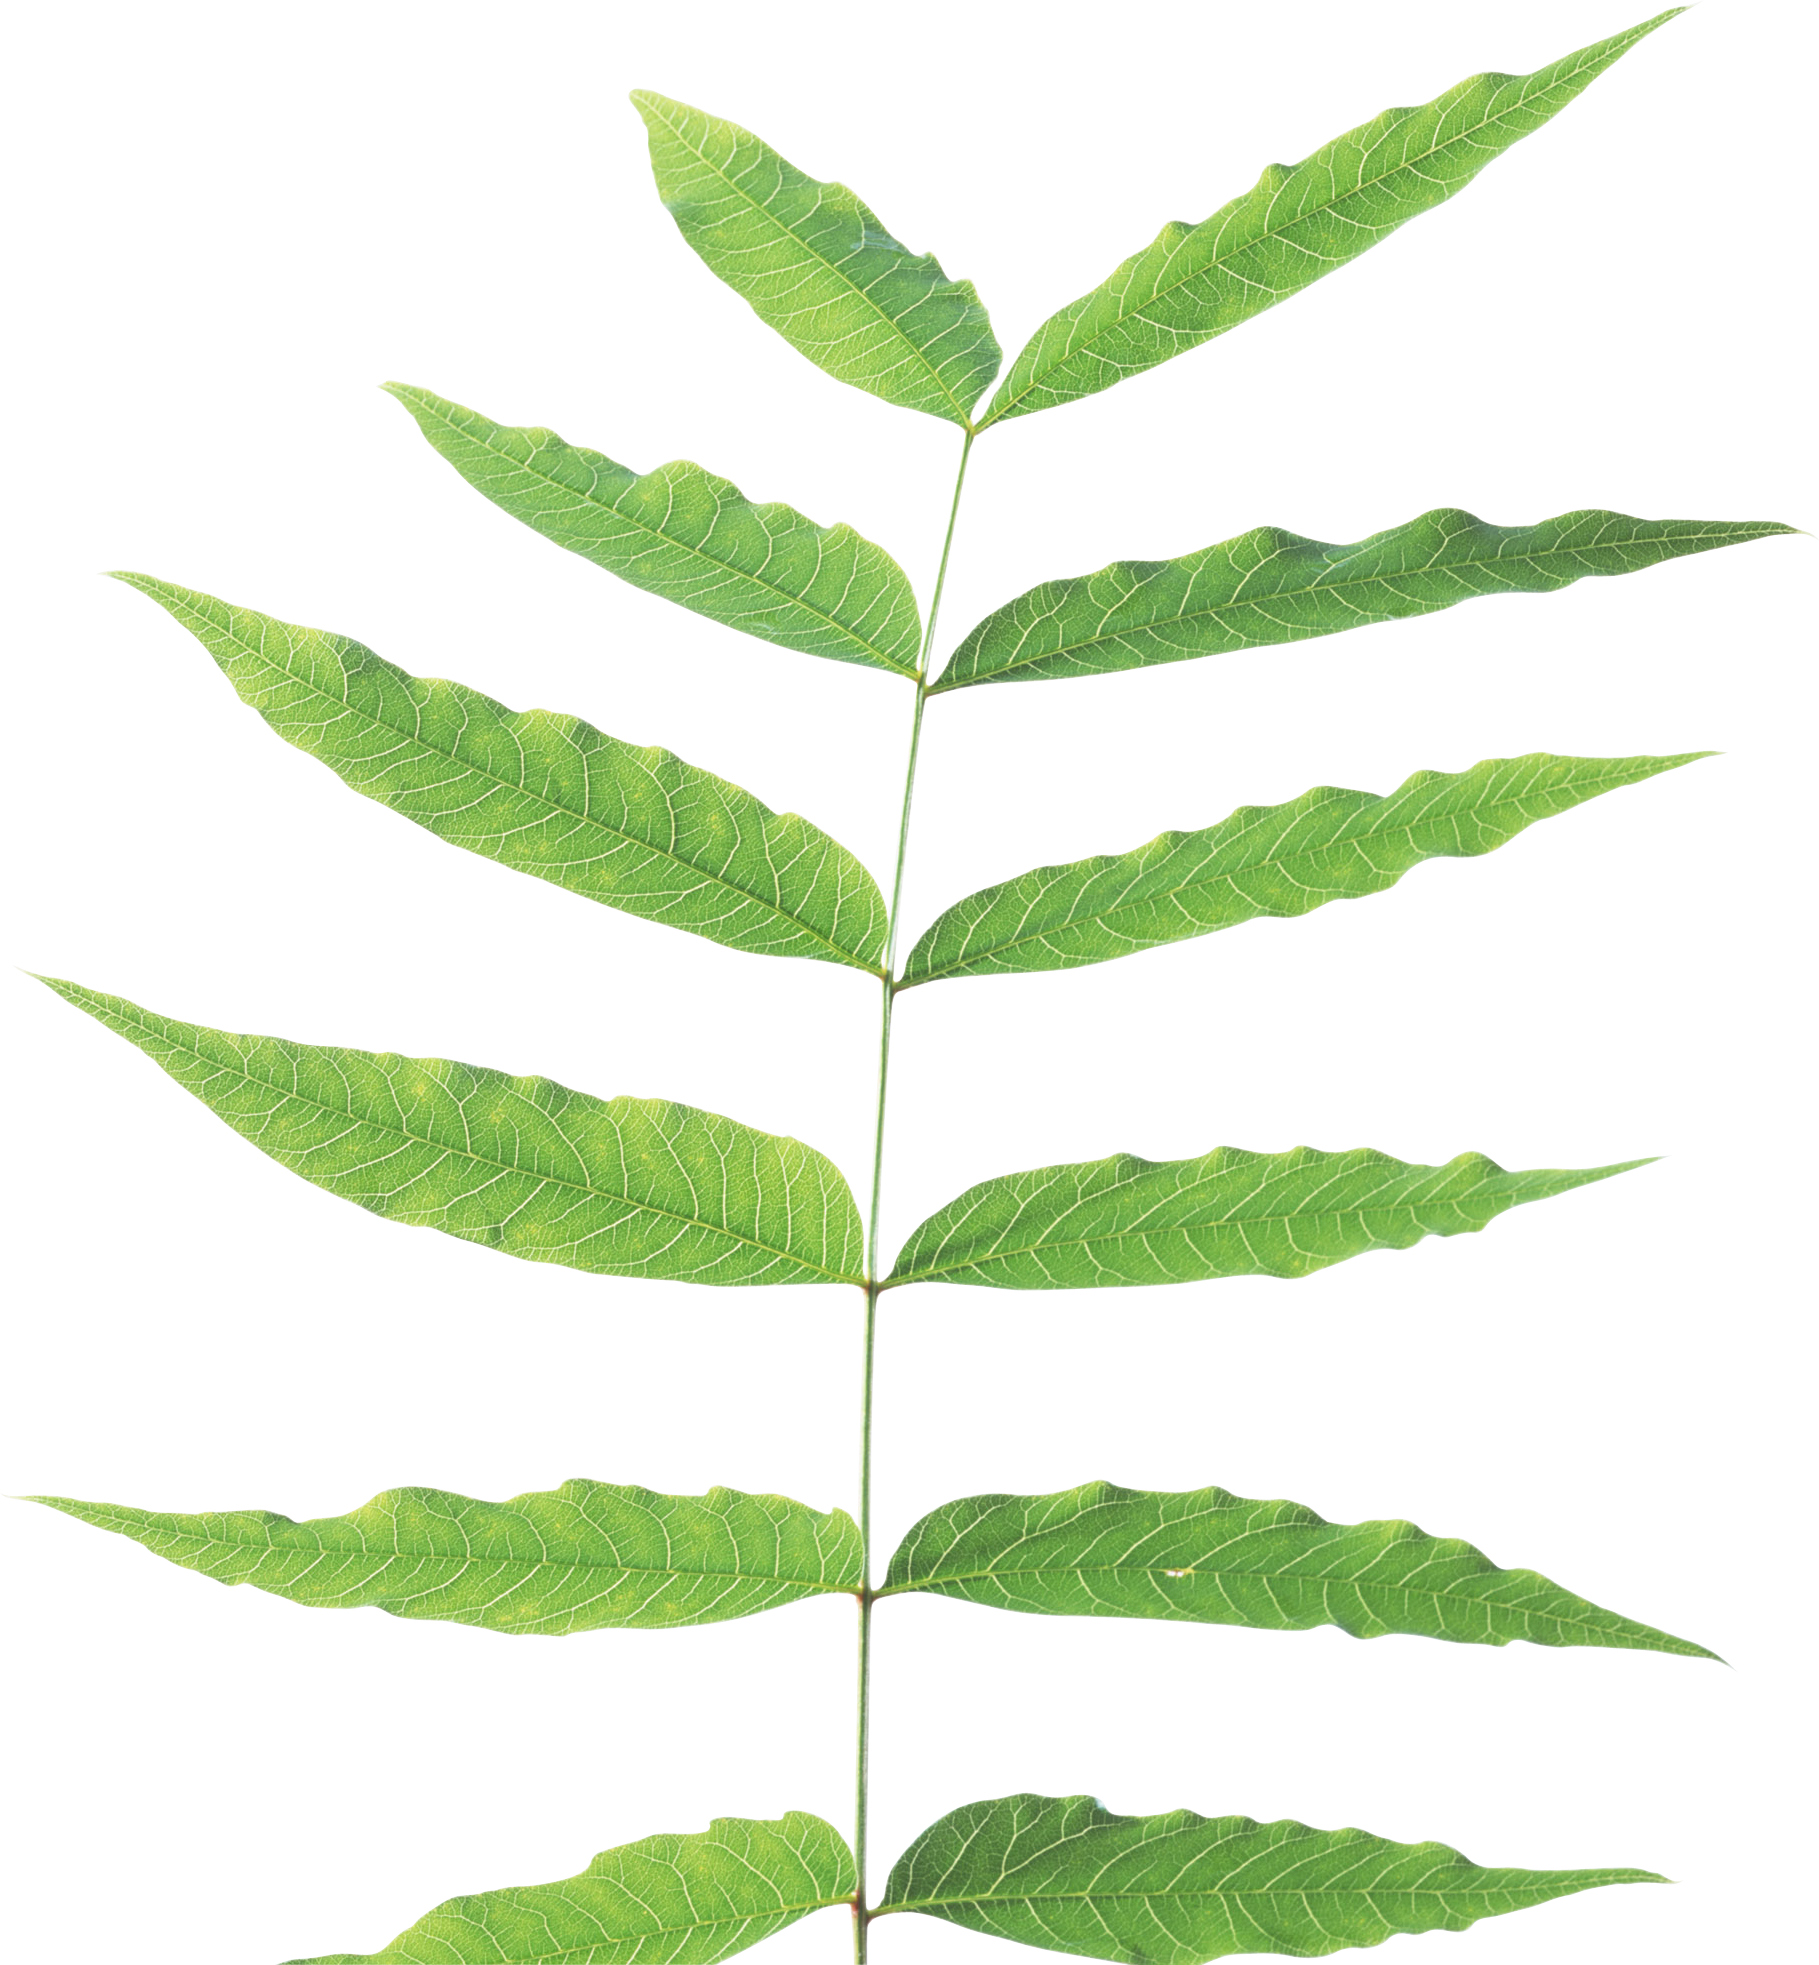 Green leaves PNG Image - PurePNG | Free transparent CC0 ...